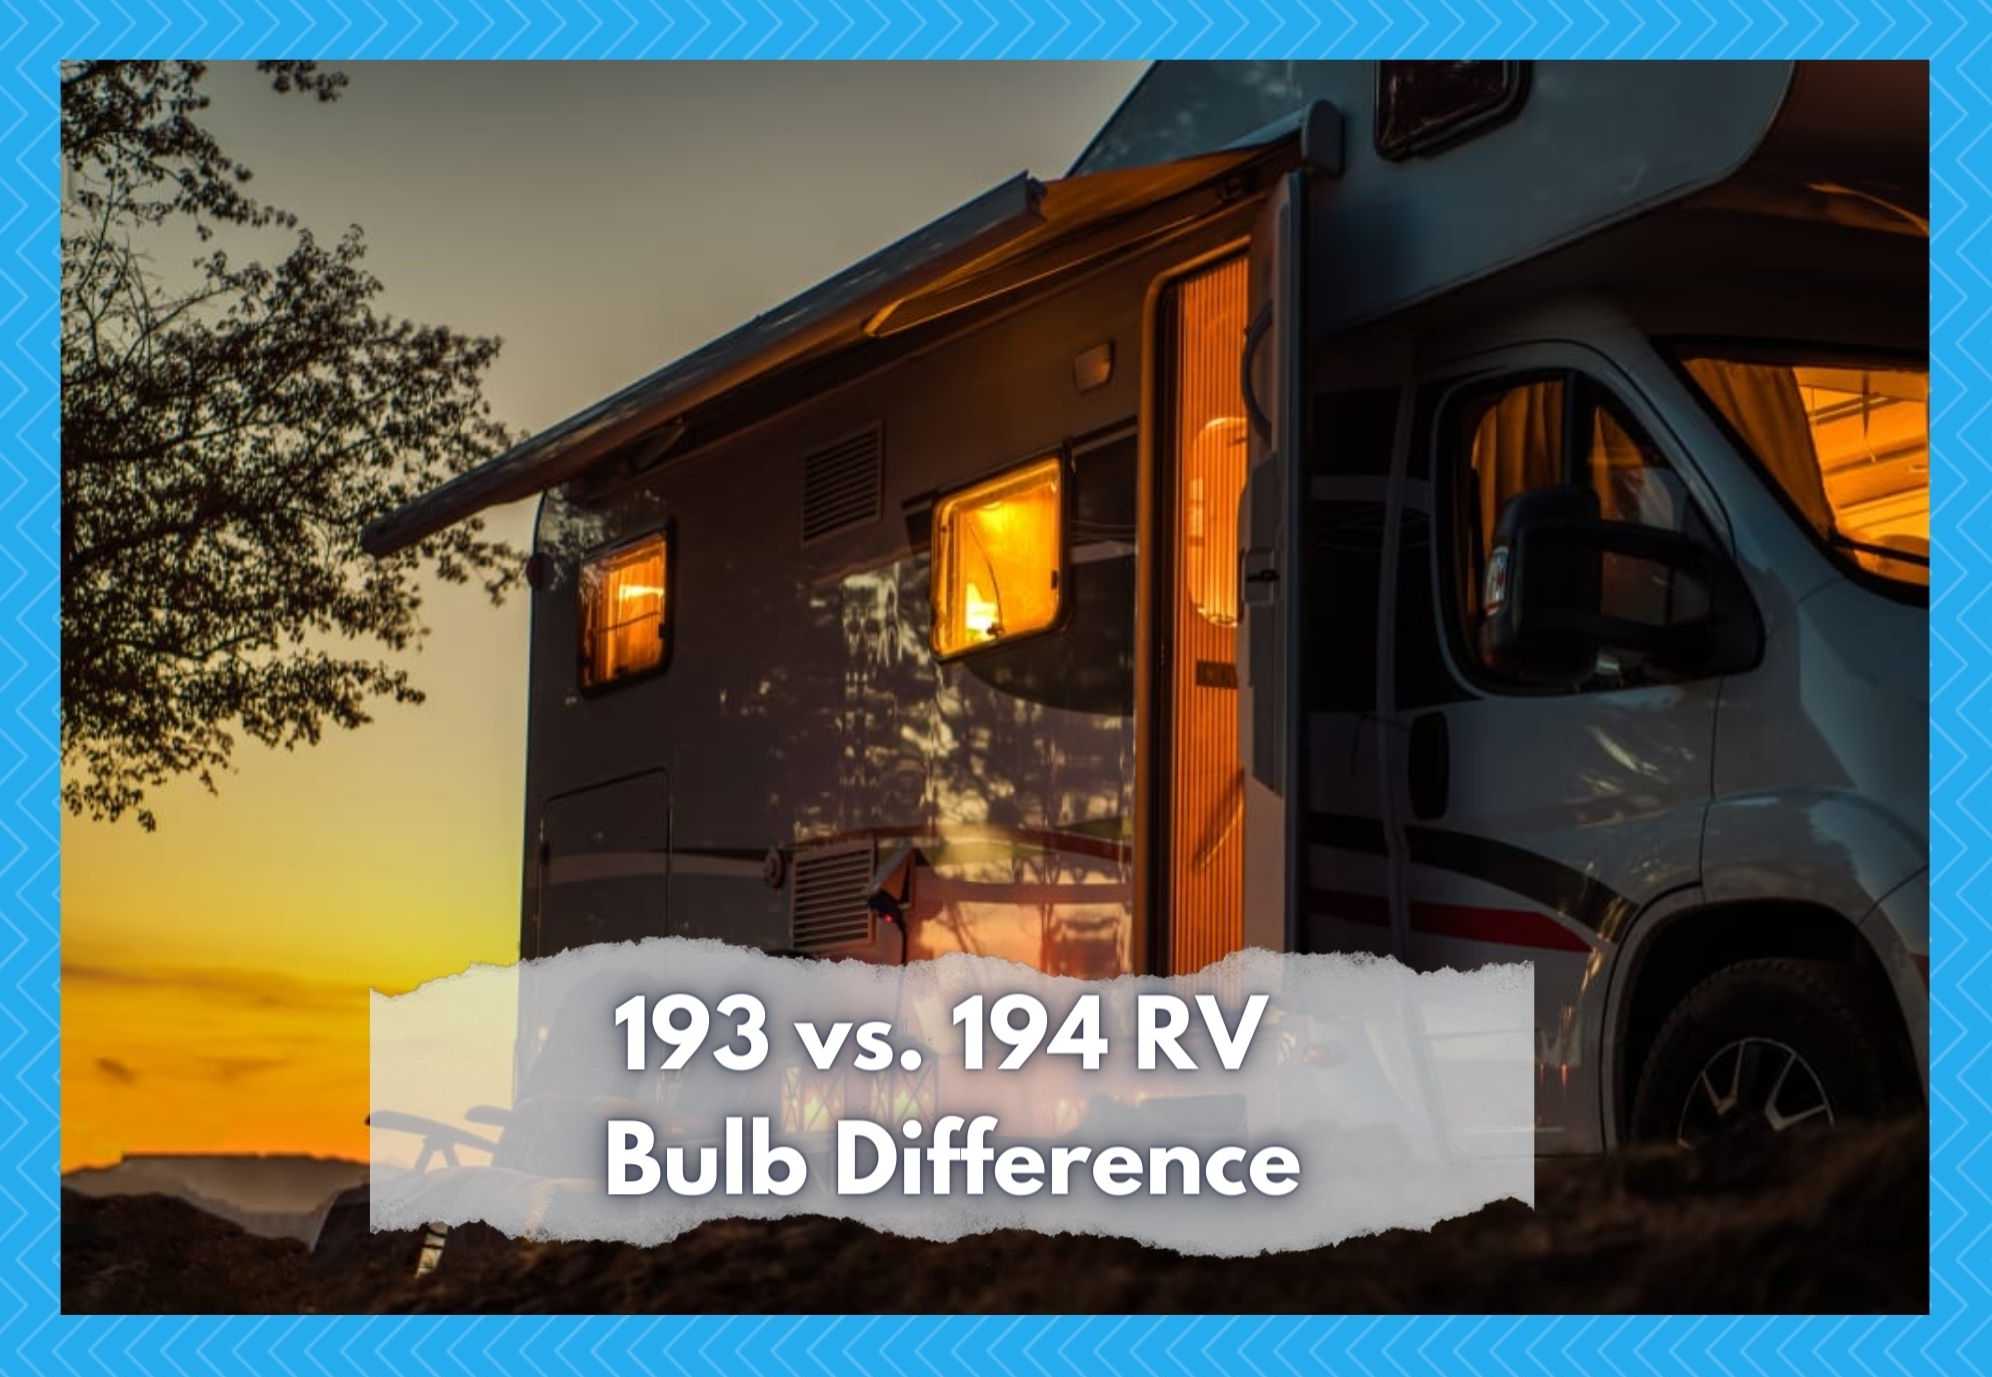 difference between 193 and 194 rv bulb